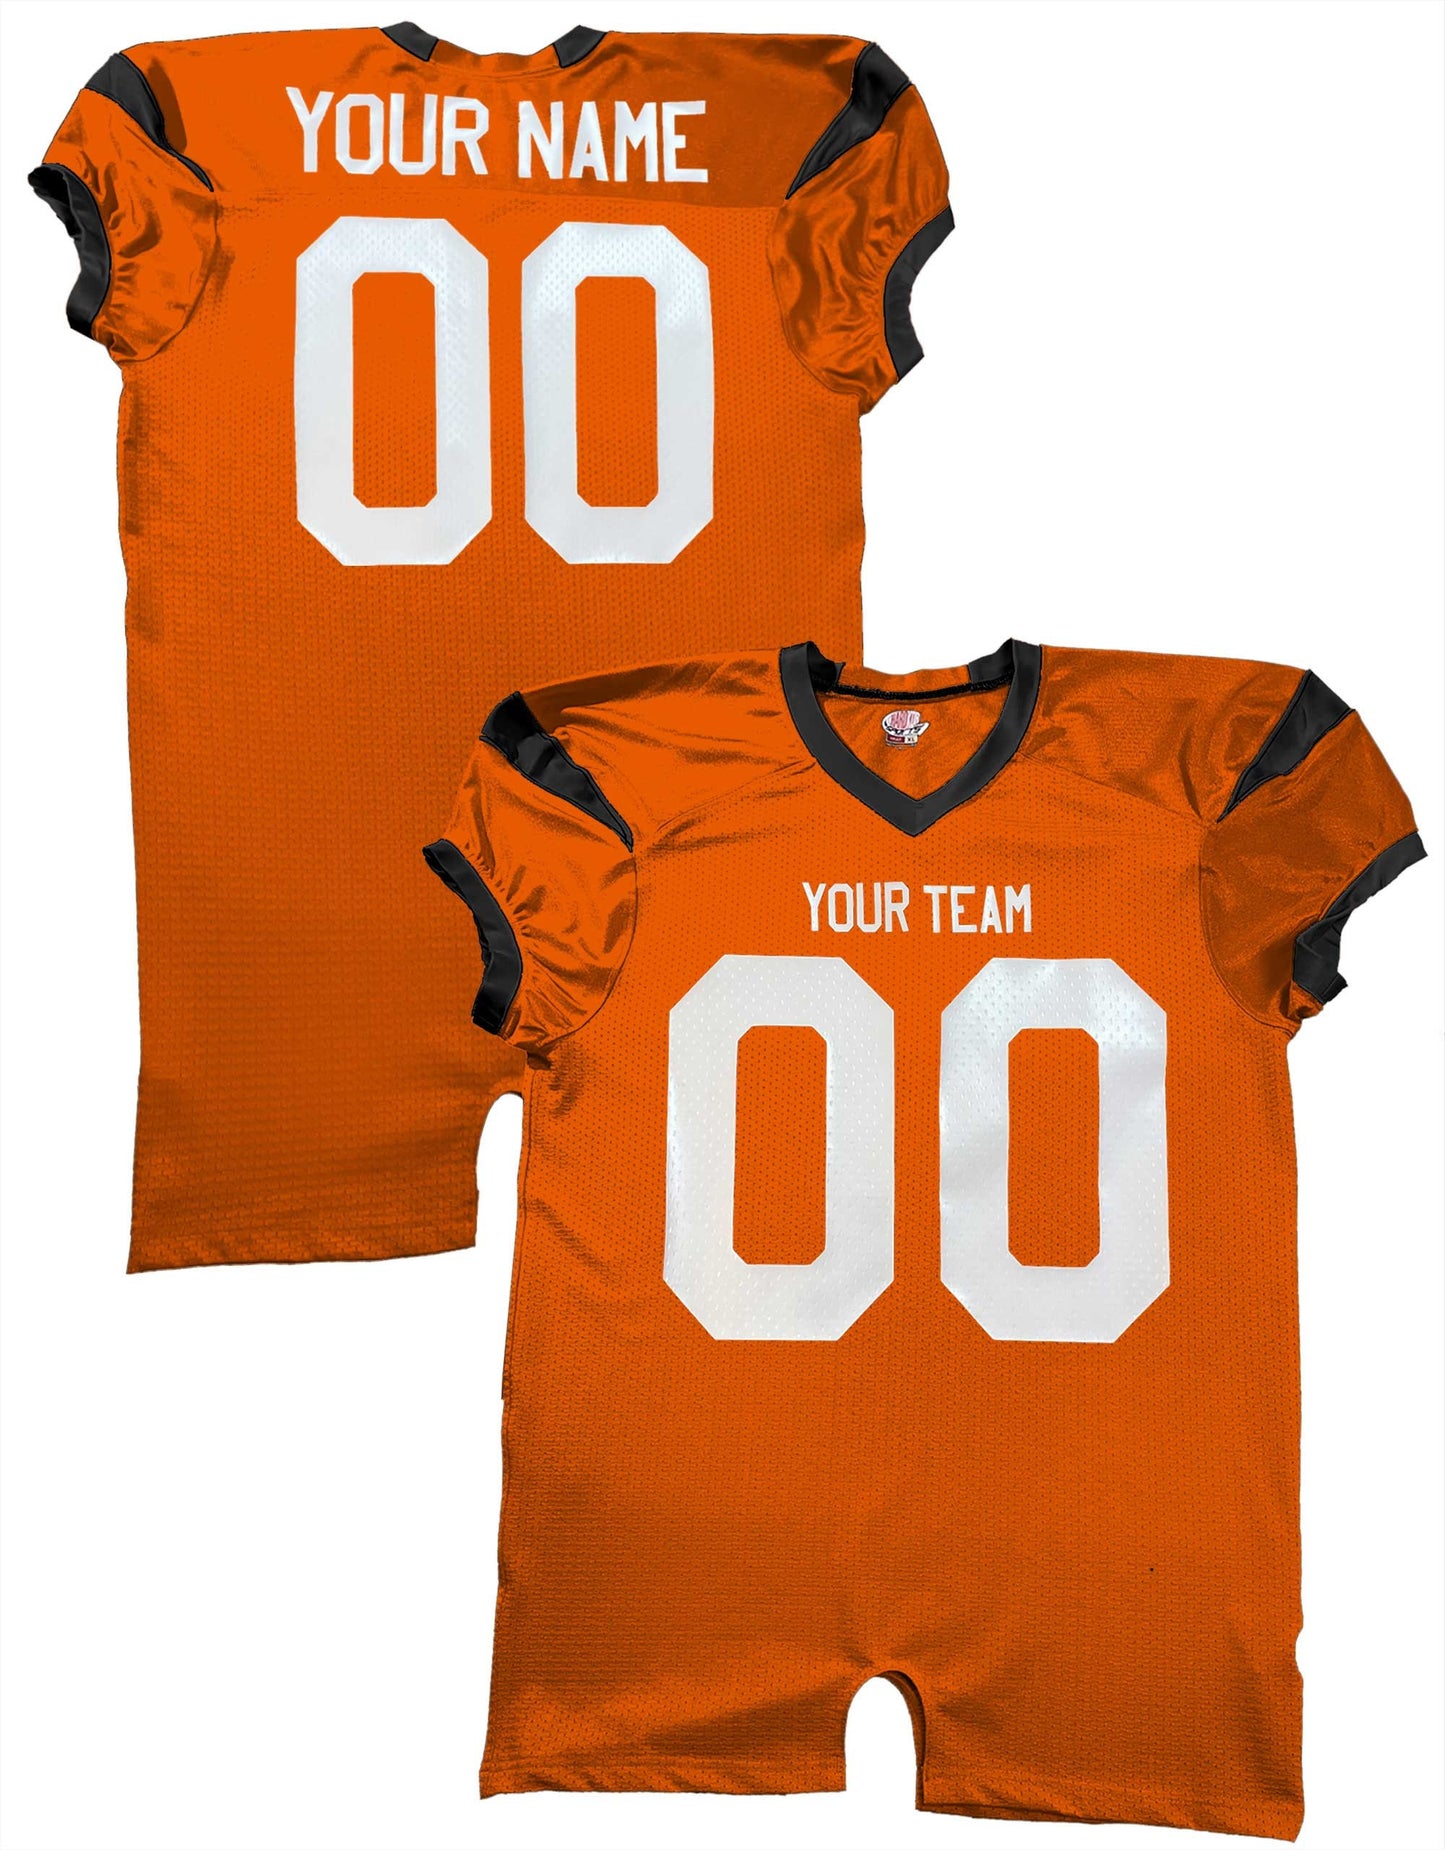 Pro fitted Game Football Team Jersey, Purple, Orange Team Colors Game Fit Custom Personalized, Football Gift, customized Names and Numbers